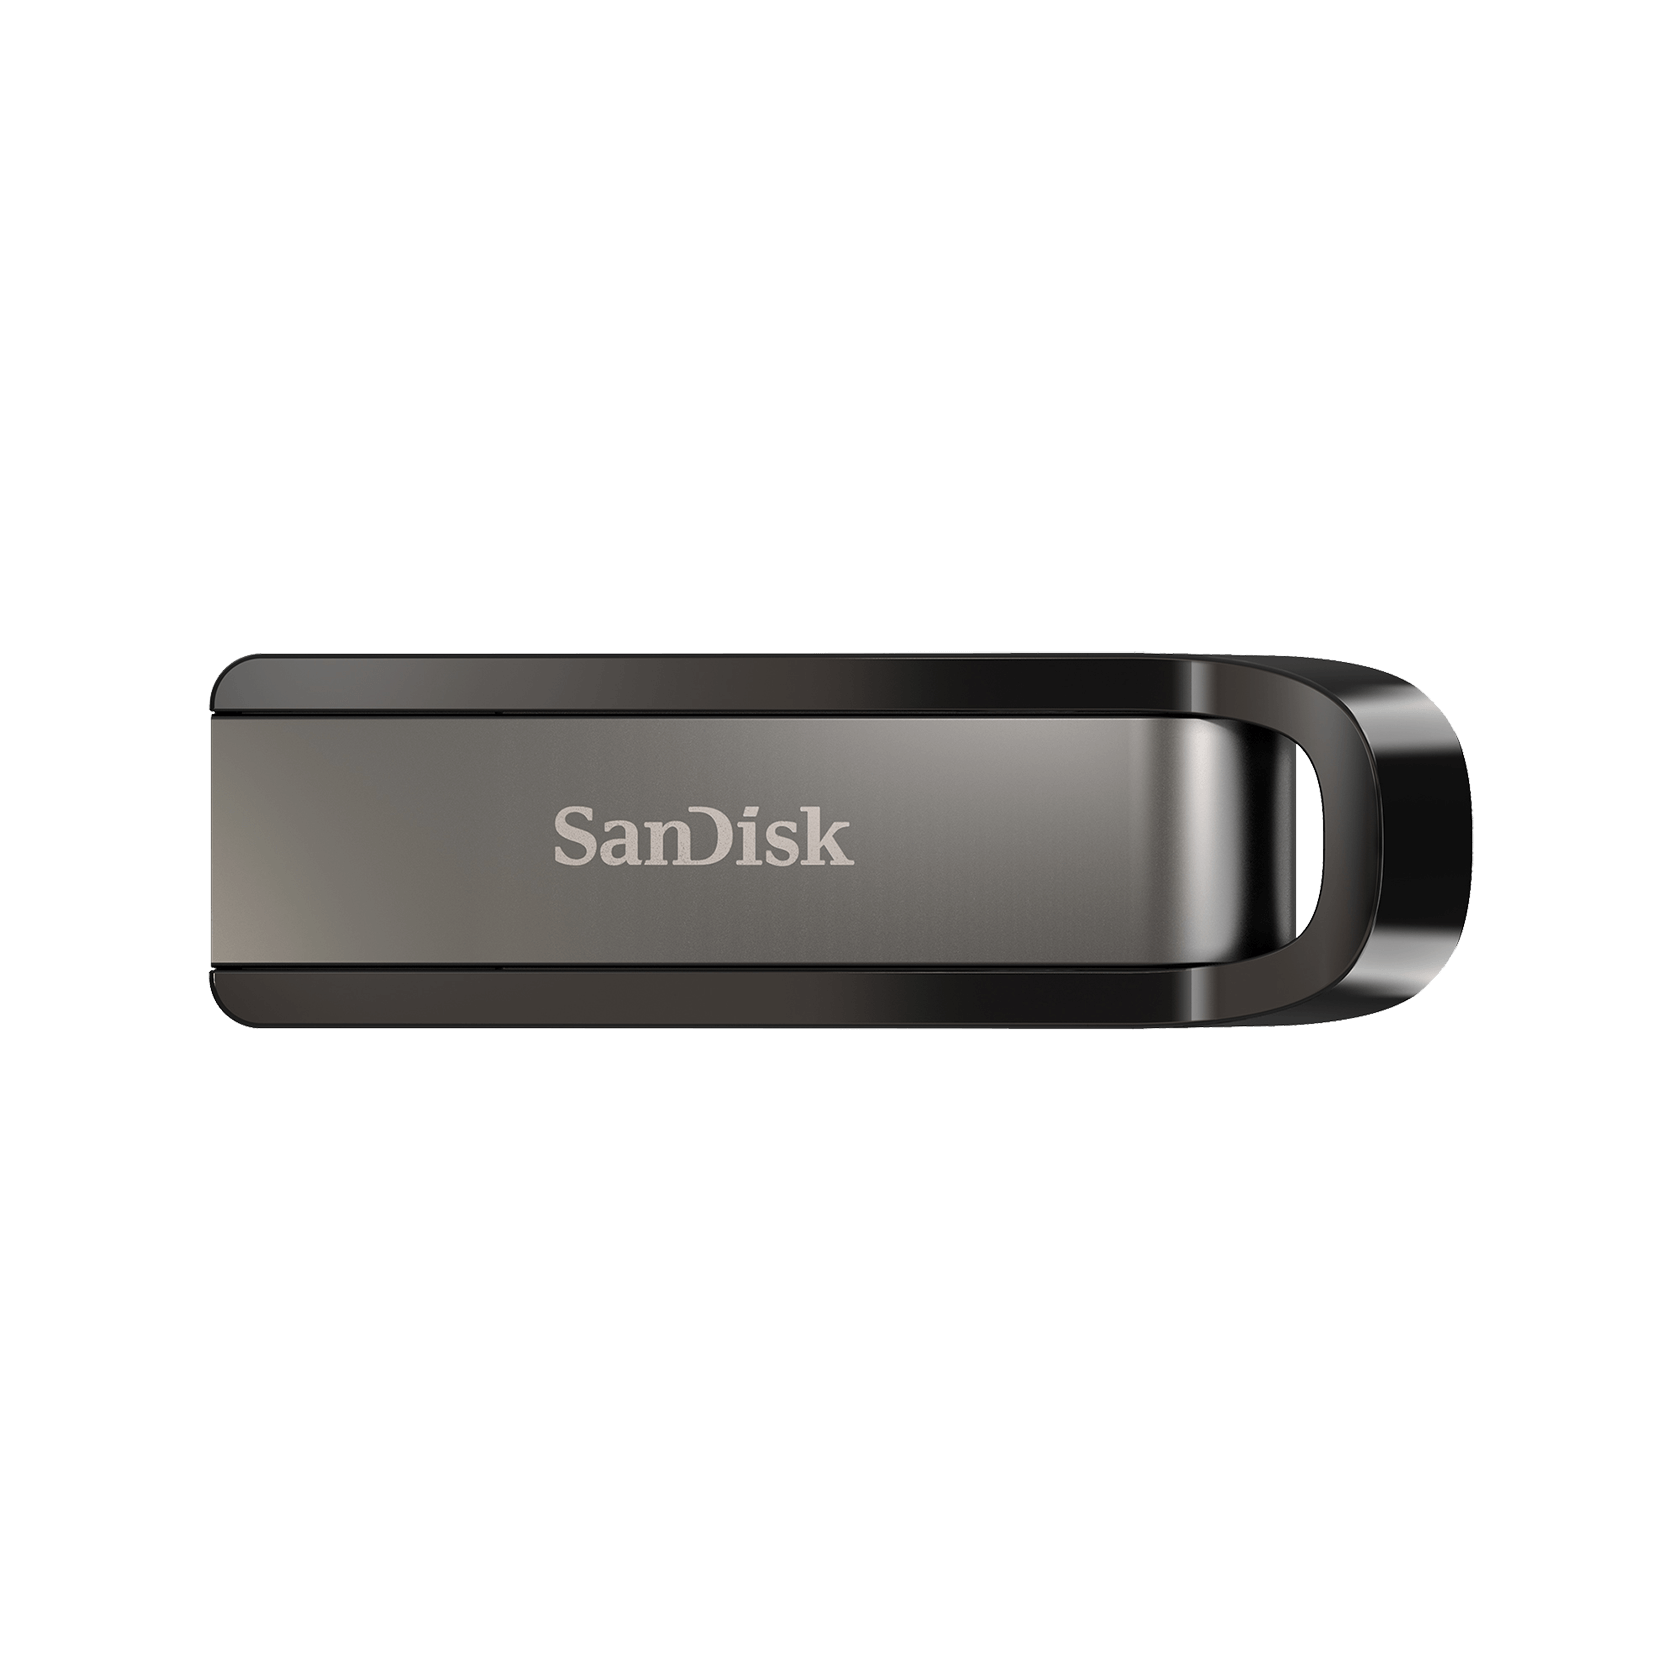 SanDisk 256GB Extreme Go USB 3.2 Gen 1 Flash Drive - SDCZ810-256G-A46 - image 2 of 8